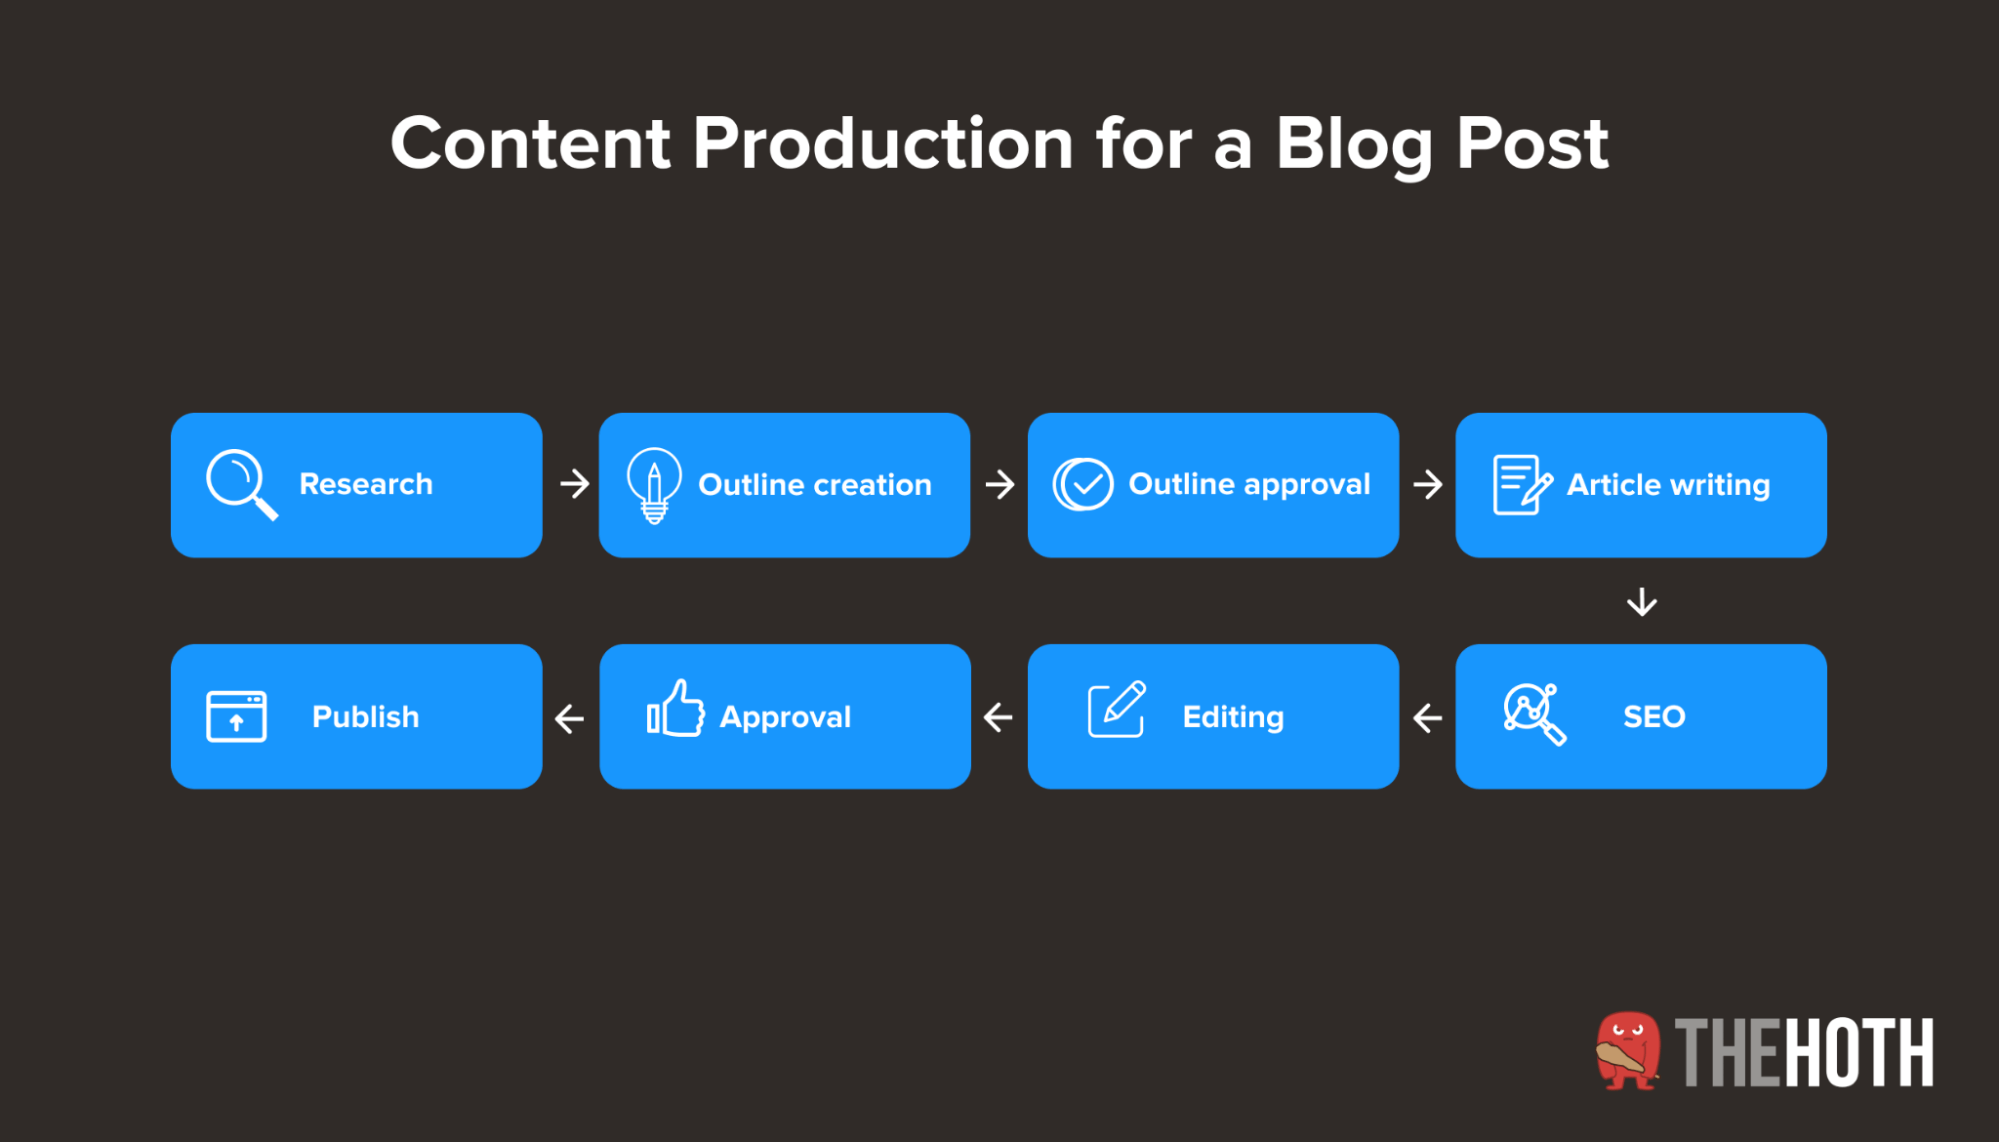 The production workflow for creating a blog post